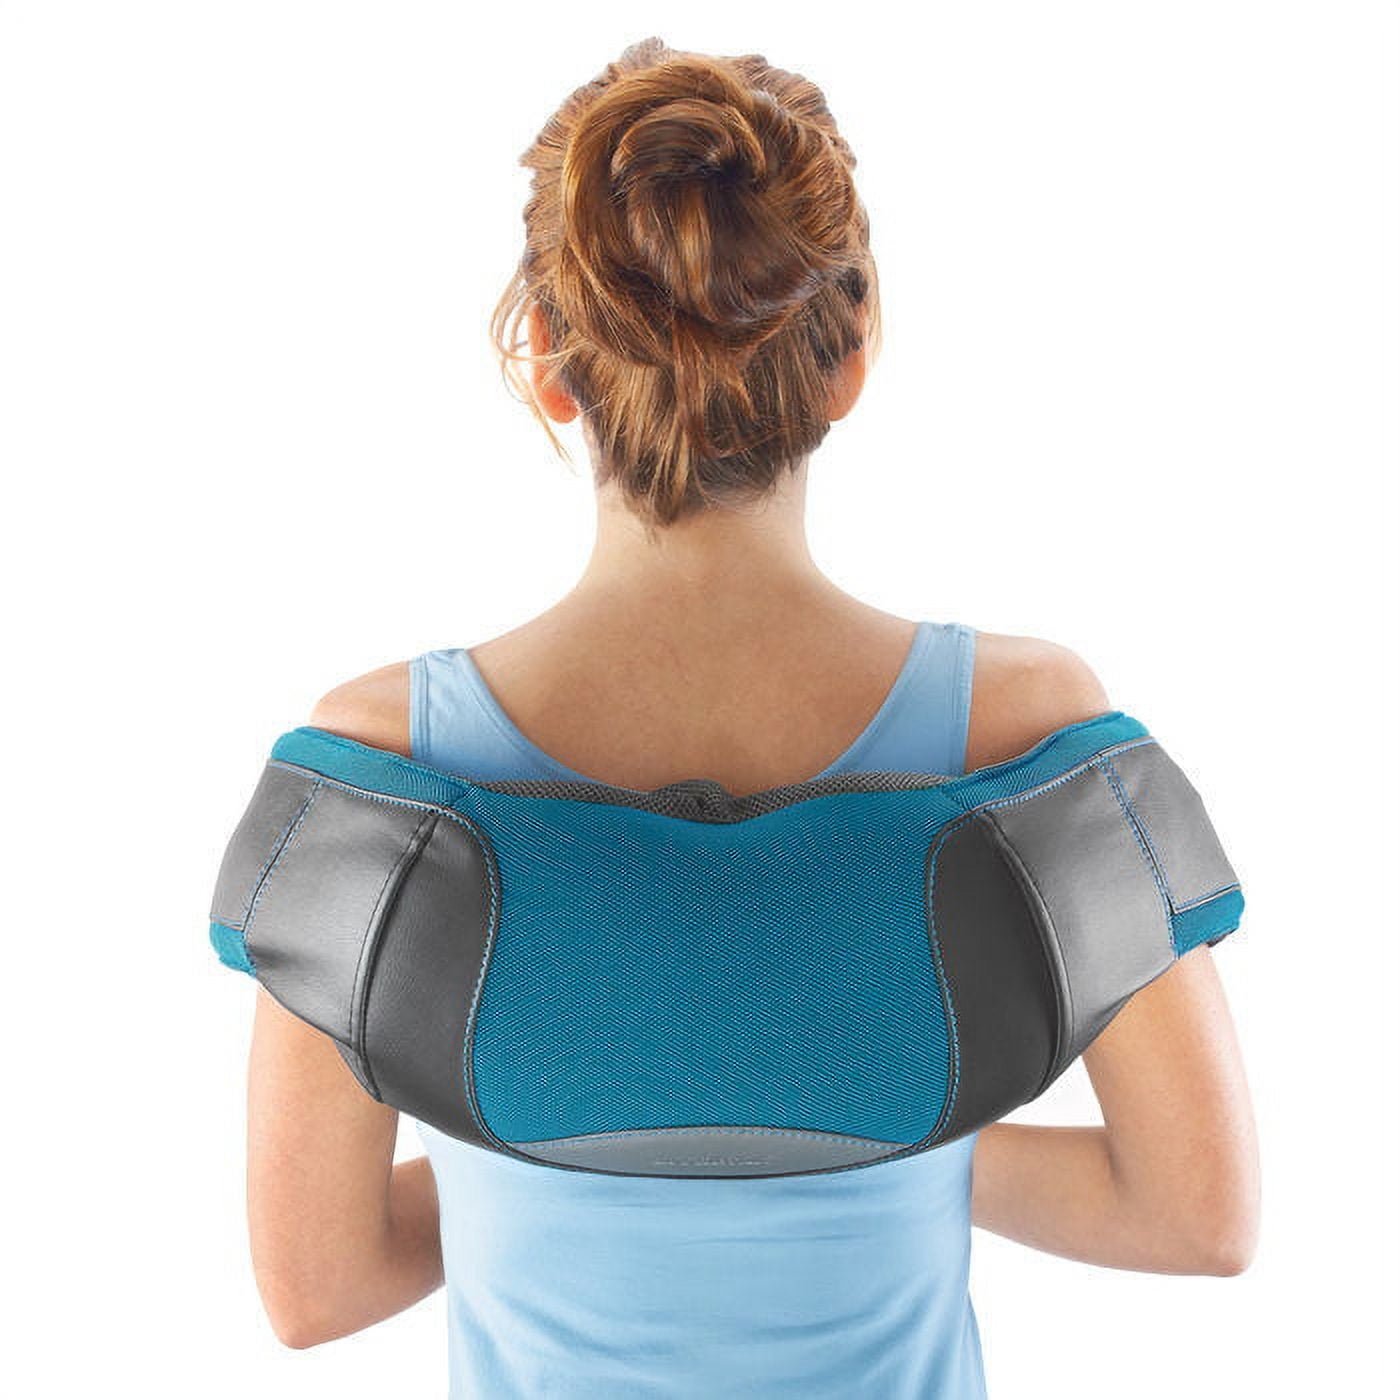 Brookstone 2-in-1 Tapping and Shiatsu Neck & Shoulder Massager